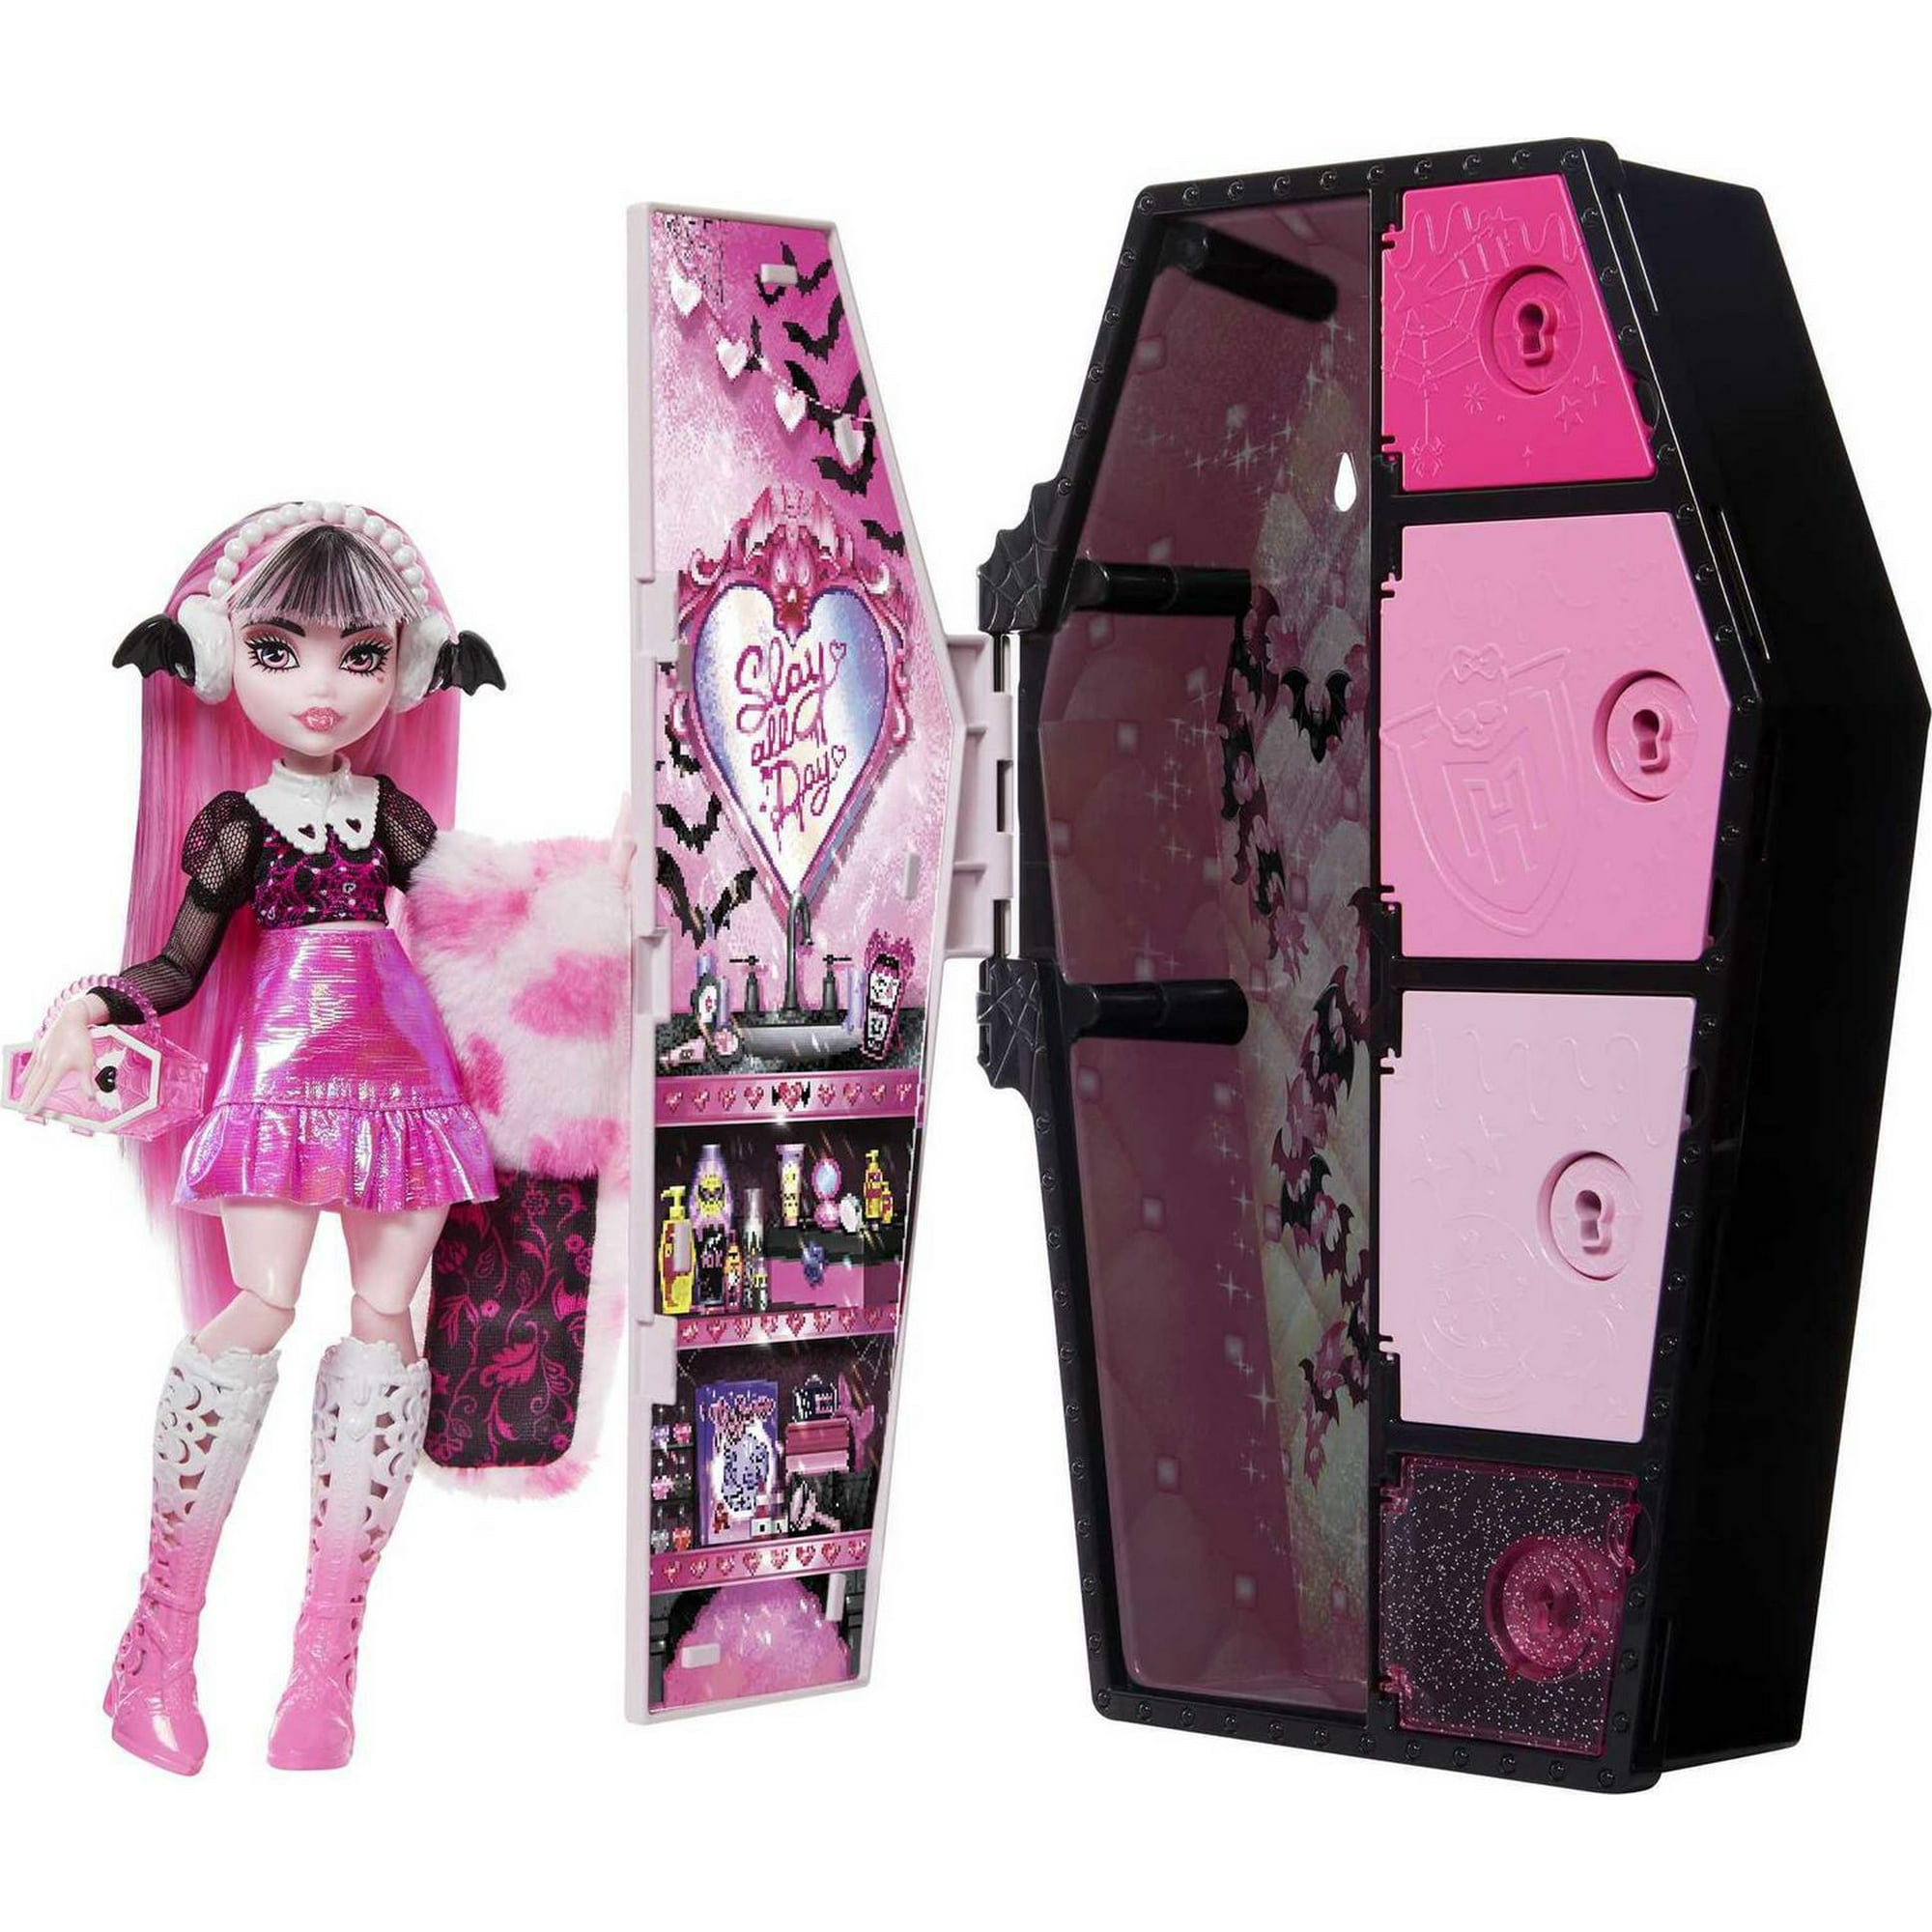 Monster High Fearidescent Series of Dolls Offers a Spooktacular Unboxing  Experience